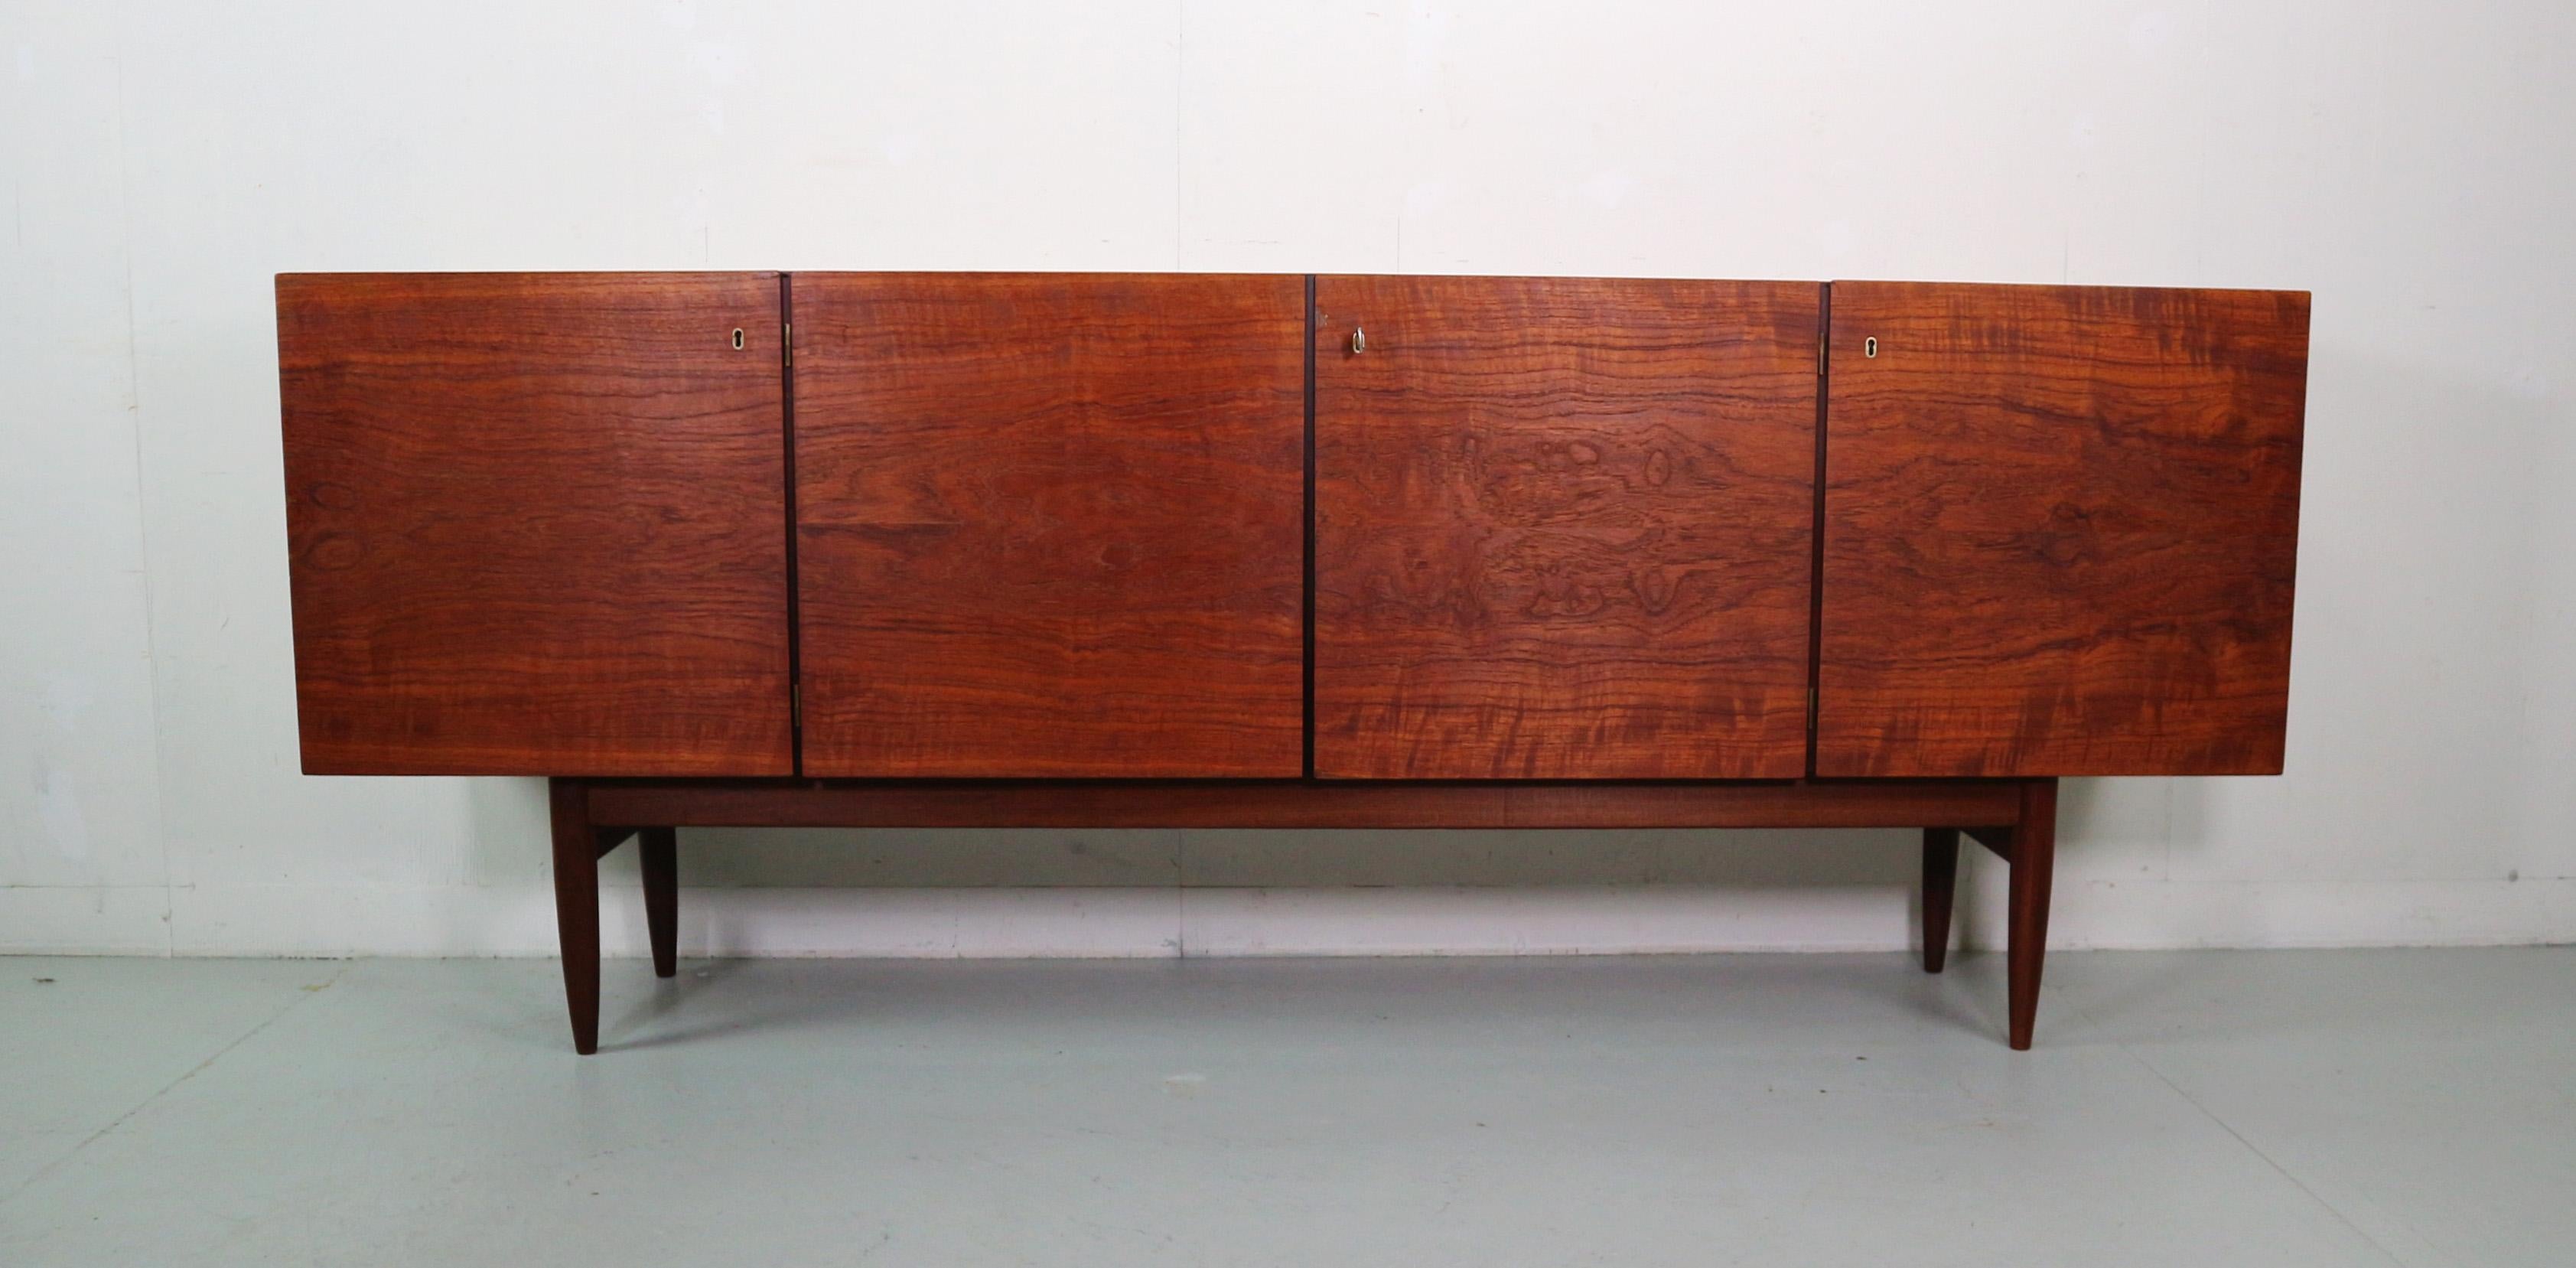 Scandinavian Modern period sideboard produced in 1960's Denmark. 
Four doors and behind yhe right door four drawers in black and white.
The patterns of the wood is very beautiful.
Solid frame and feet.
All the locks are working with one key.

After